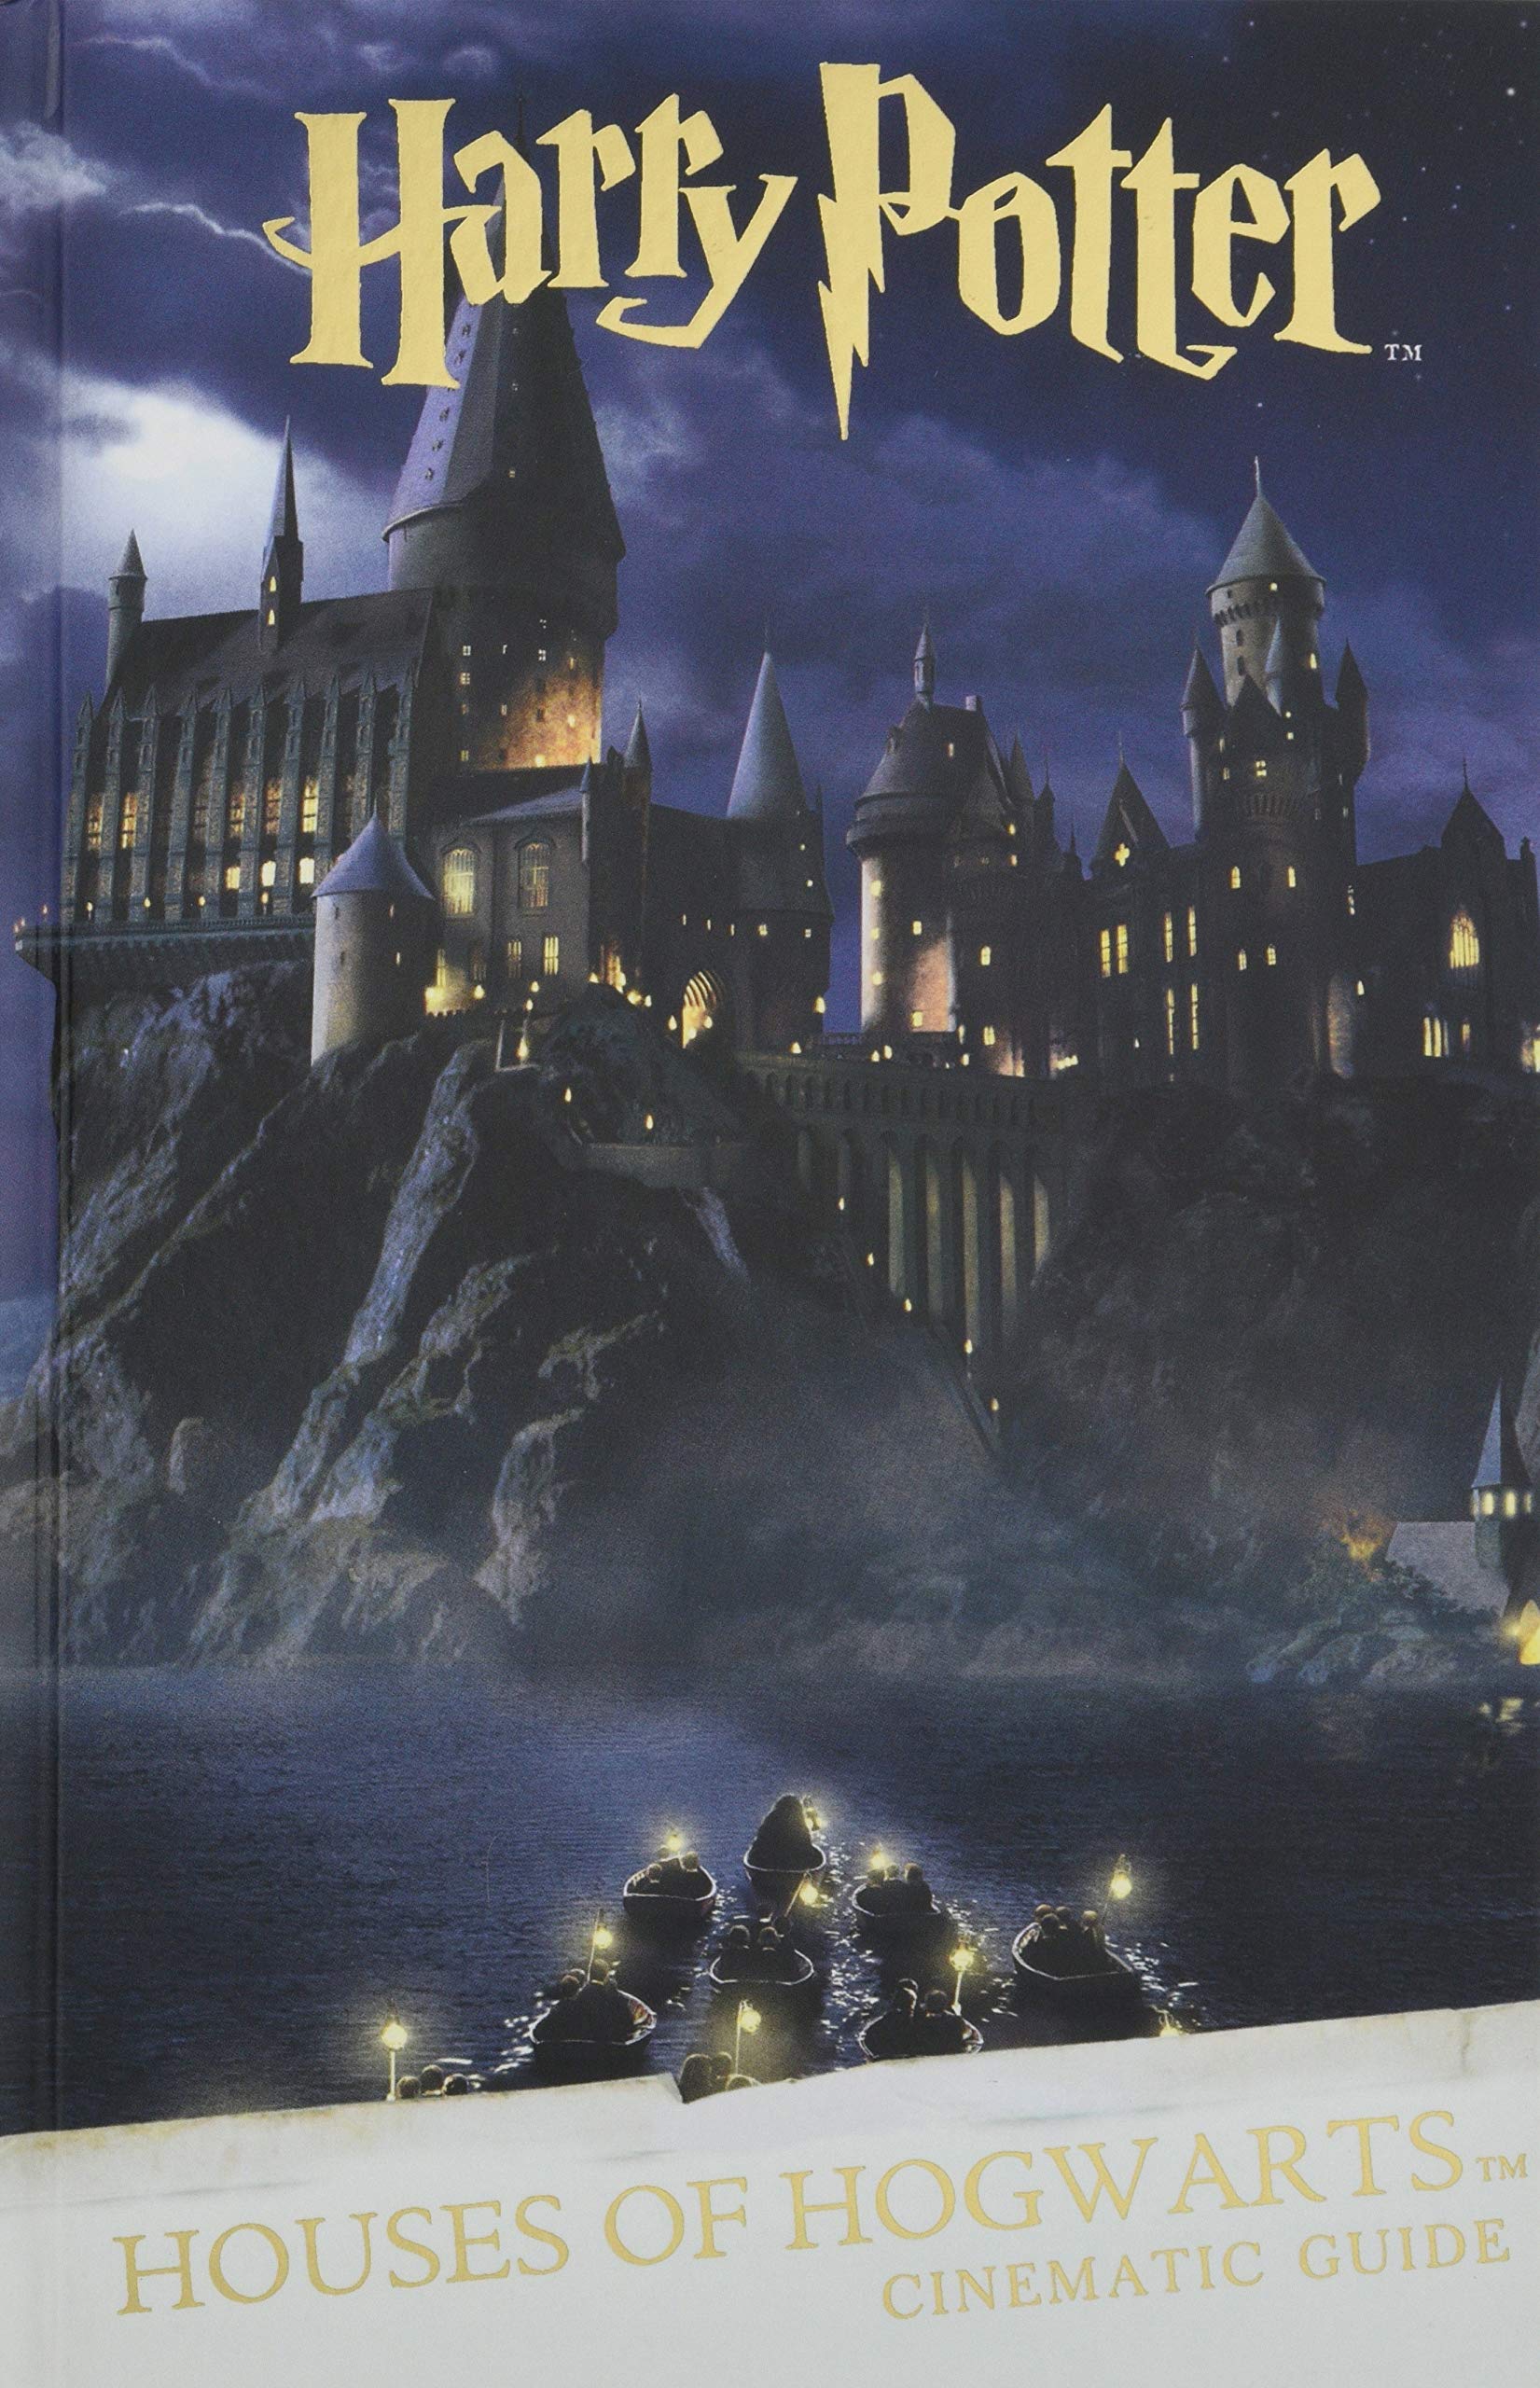 HARRY POTTER. HOUSES OF HOGWARTS, THE Cinematic Guide